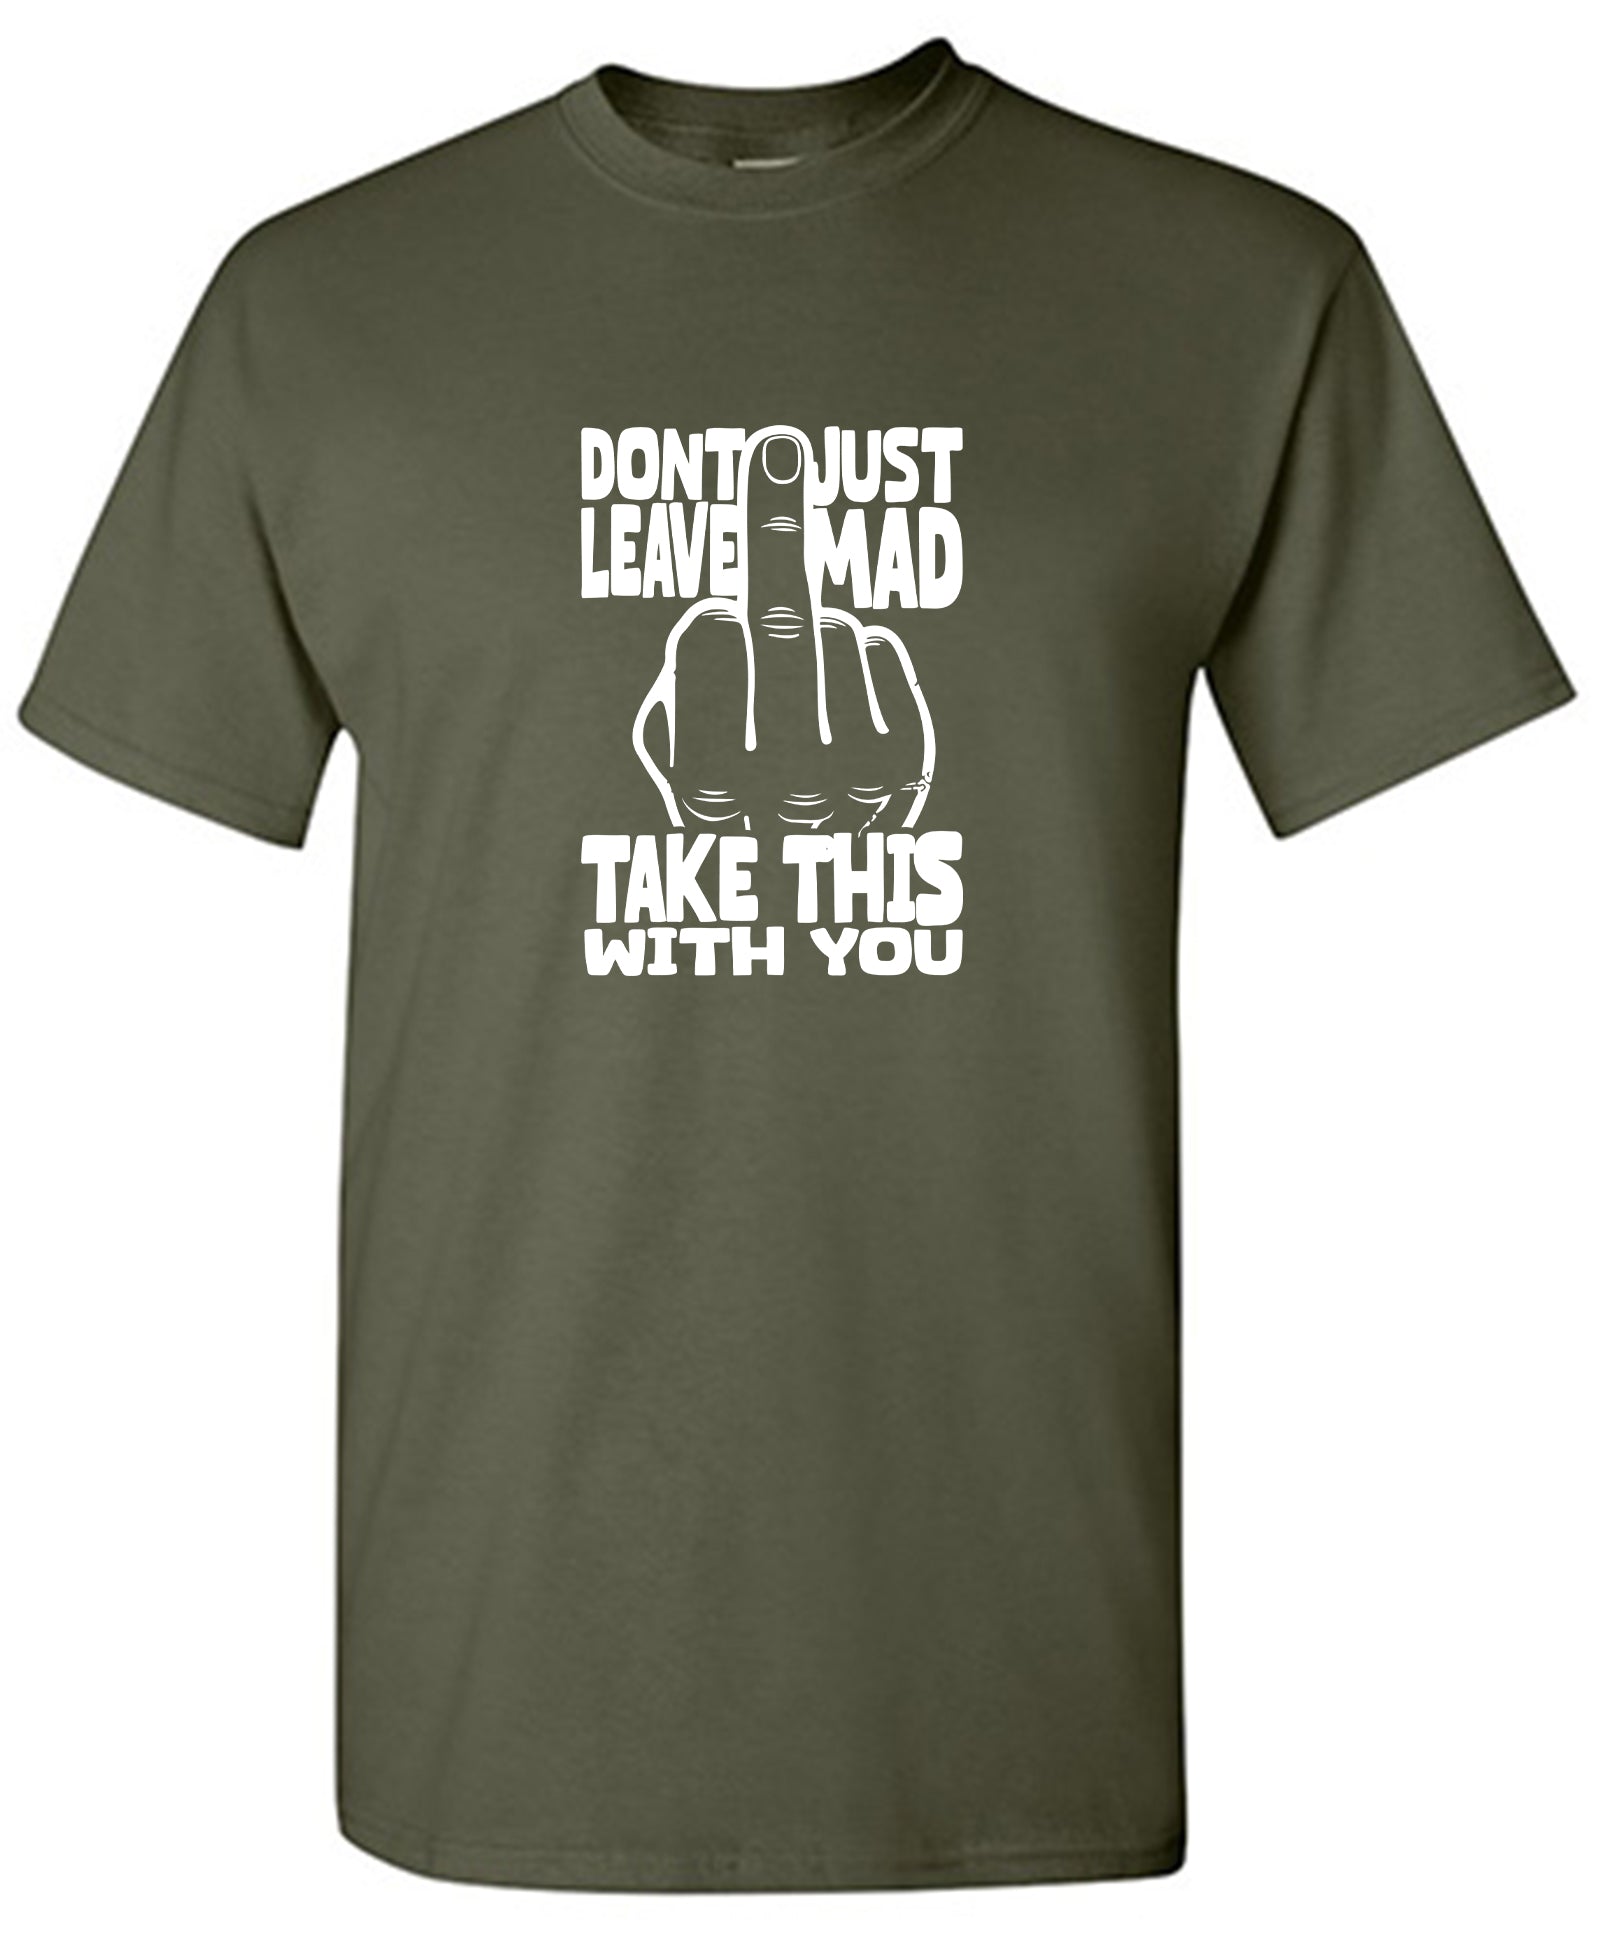 Don’t Just Leave Mad - Funny T Shirts & Graphic Tees